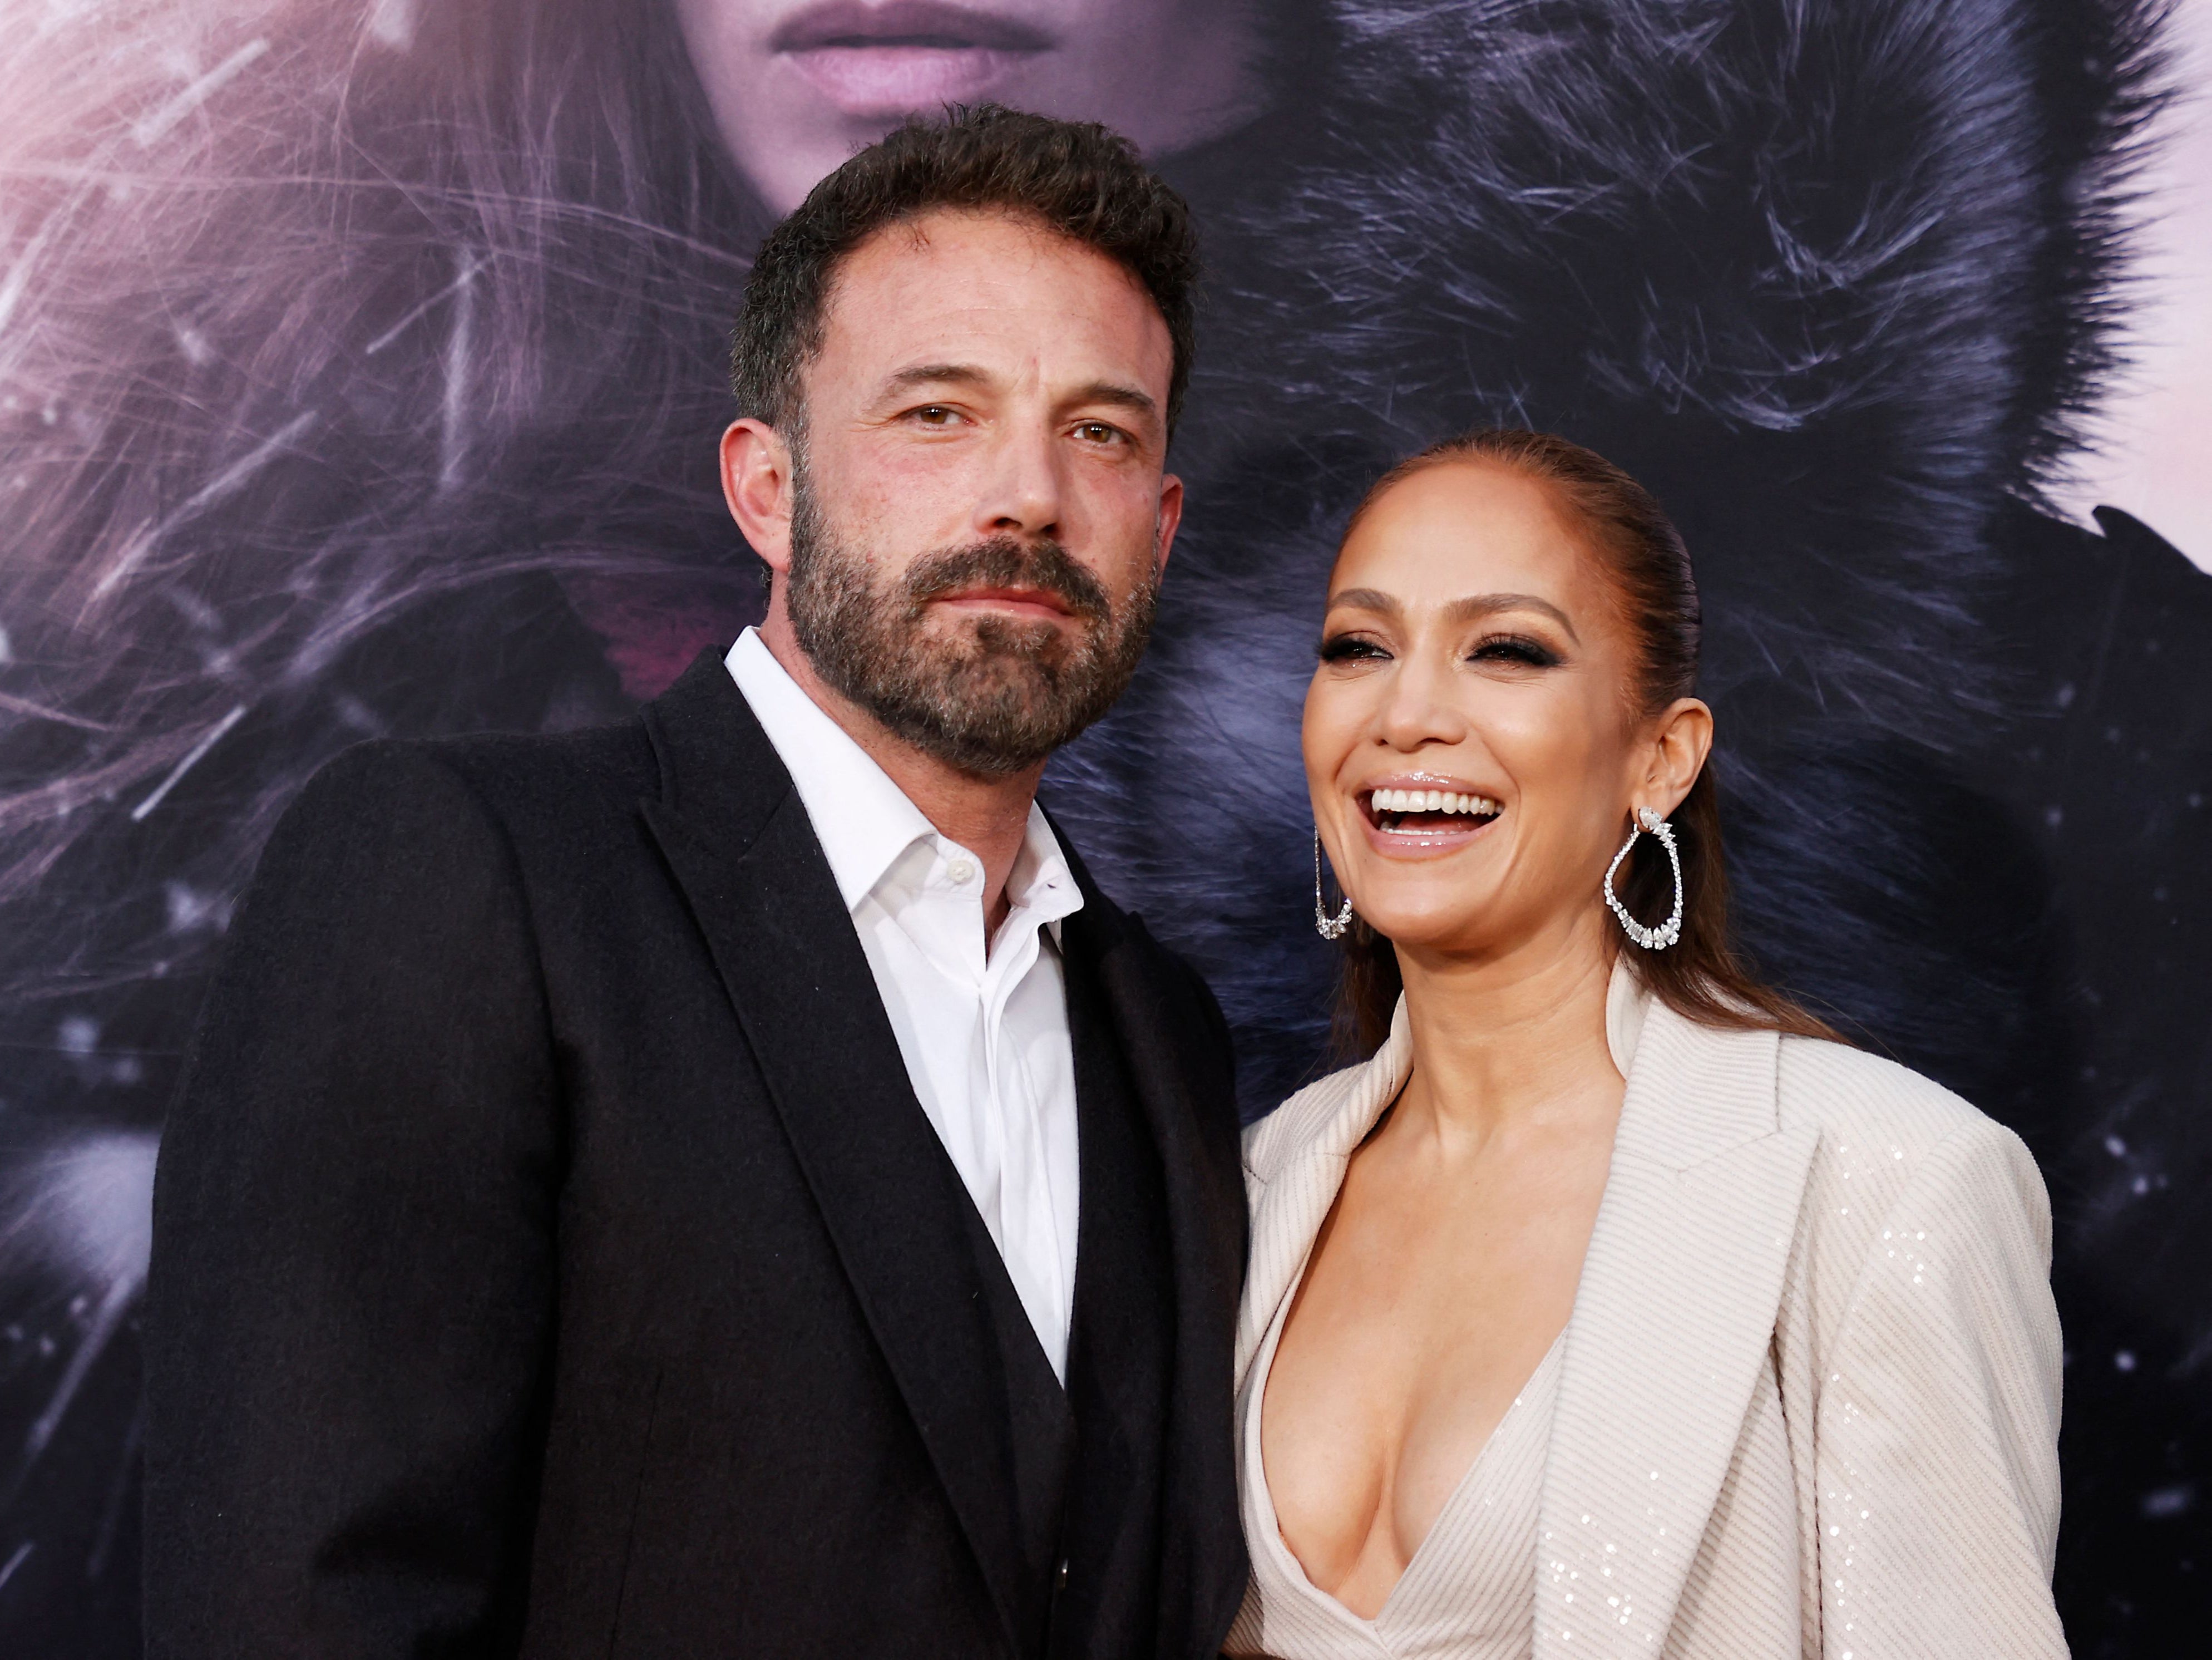 Ben Affleck and Jennifer Lopez get along despite tension in their marriage